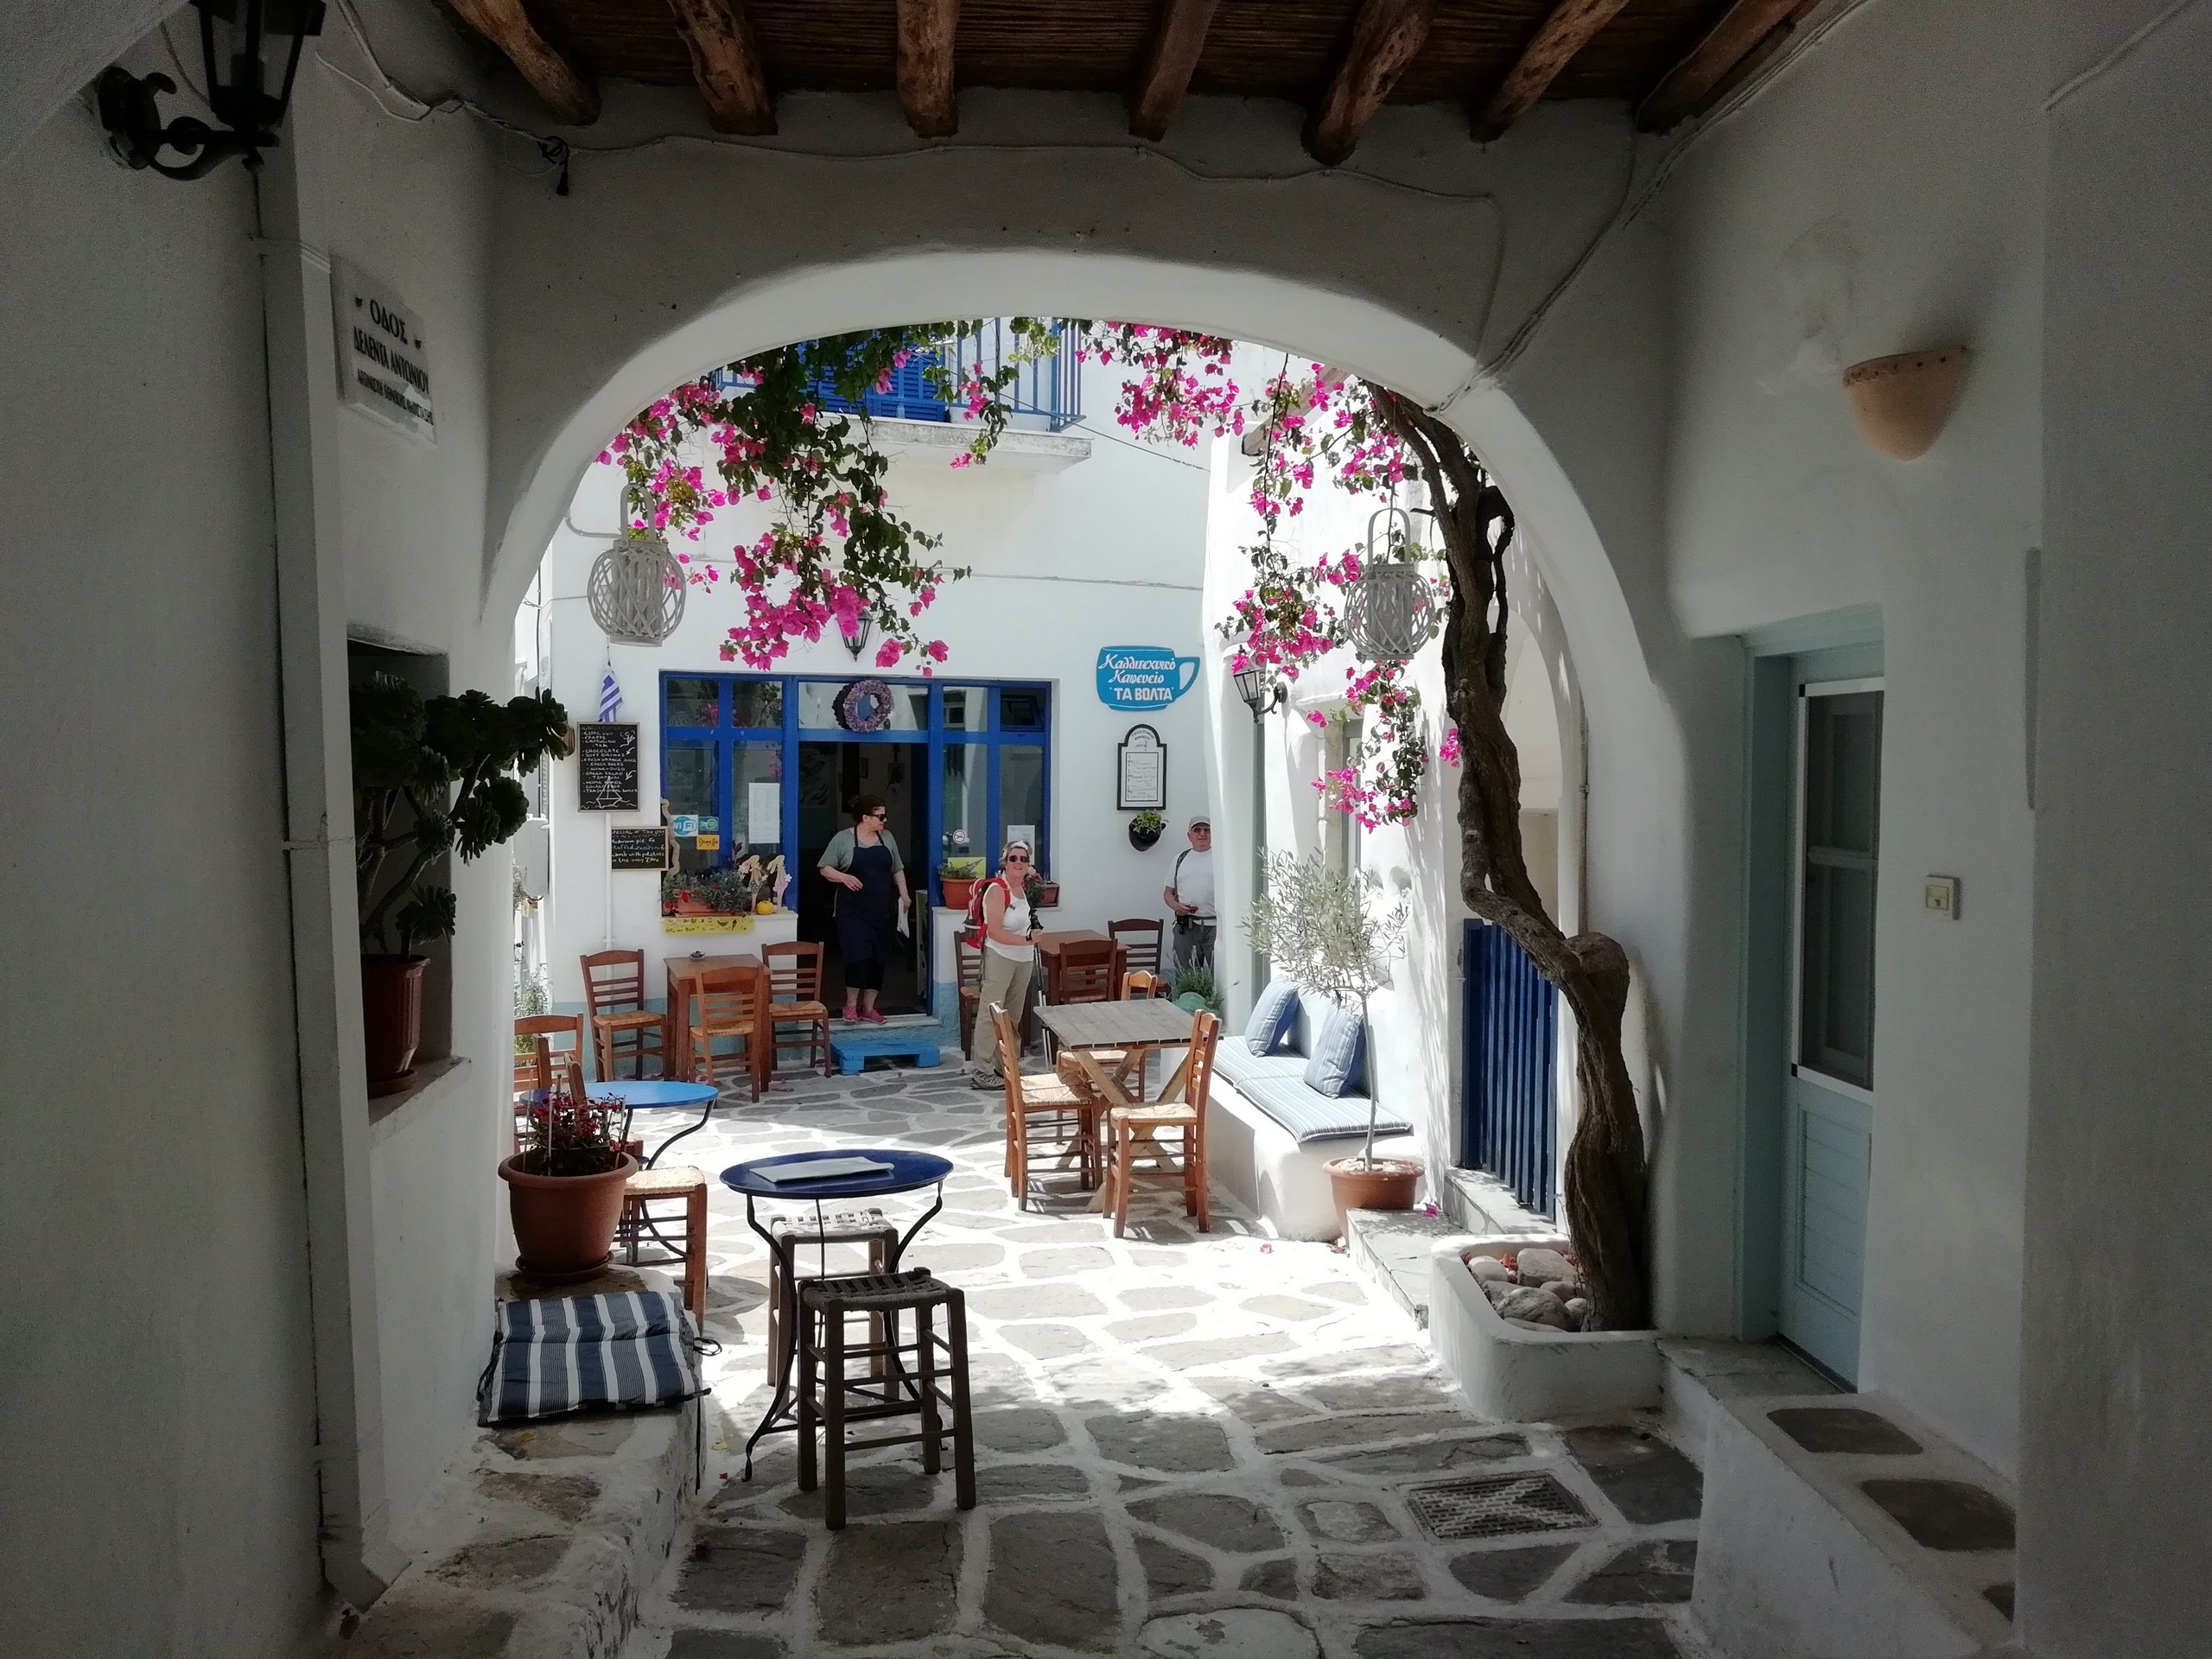 Small oldtown of one of the small towns in Cyclades Islands